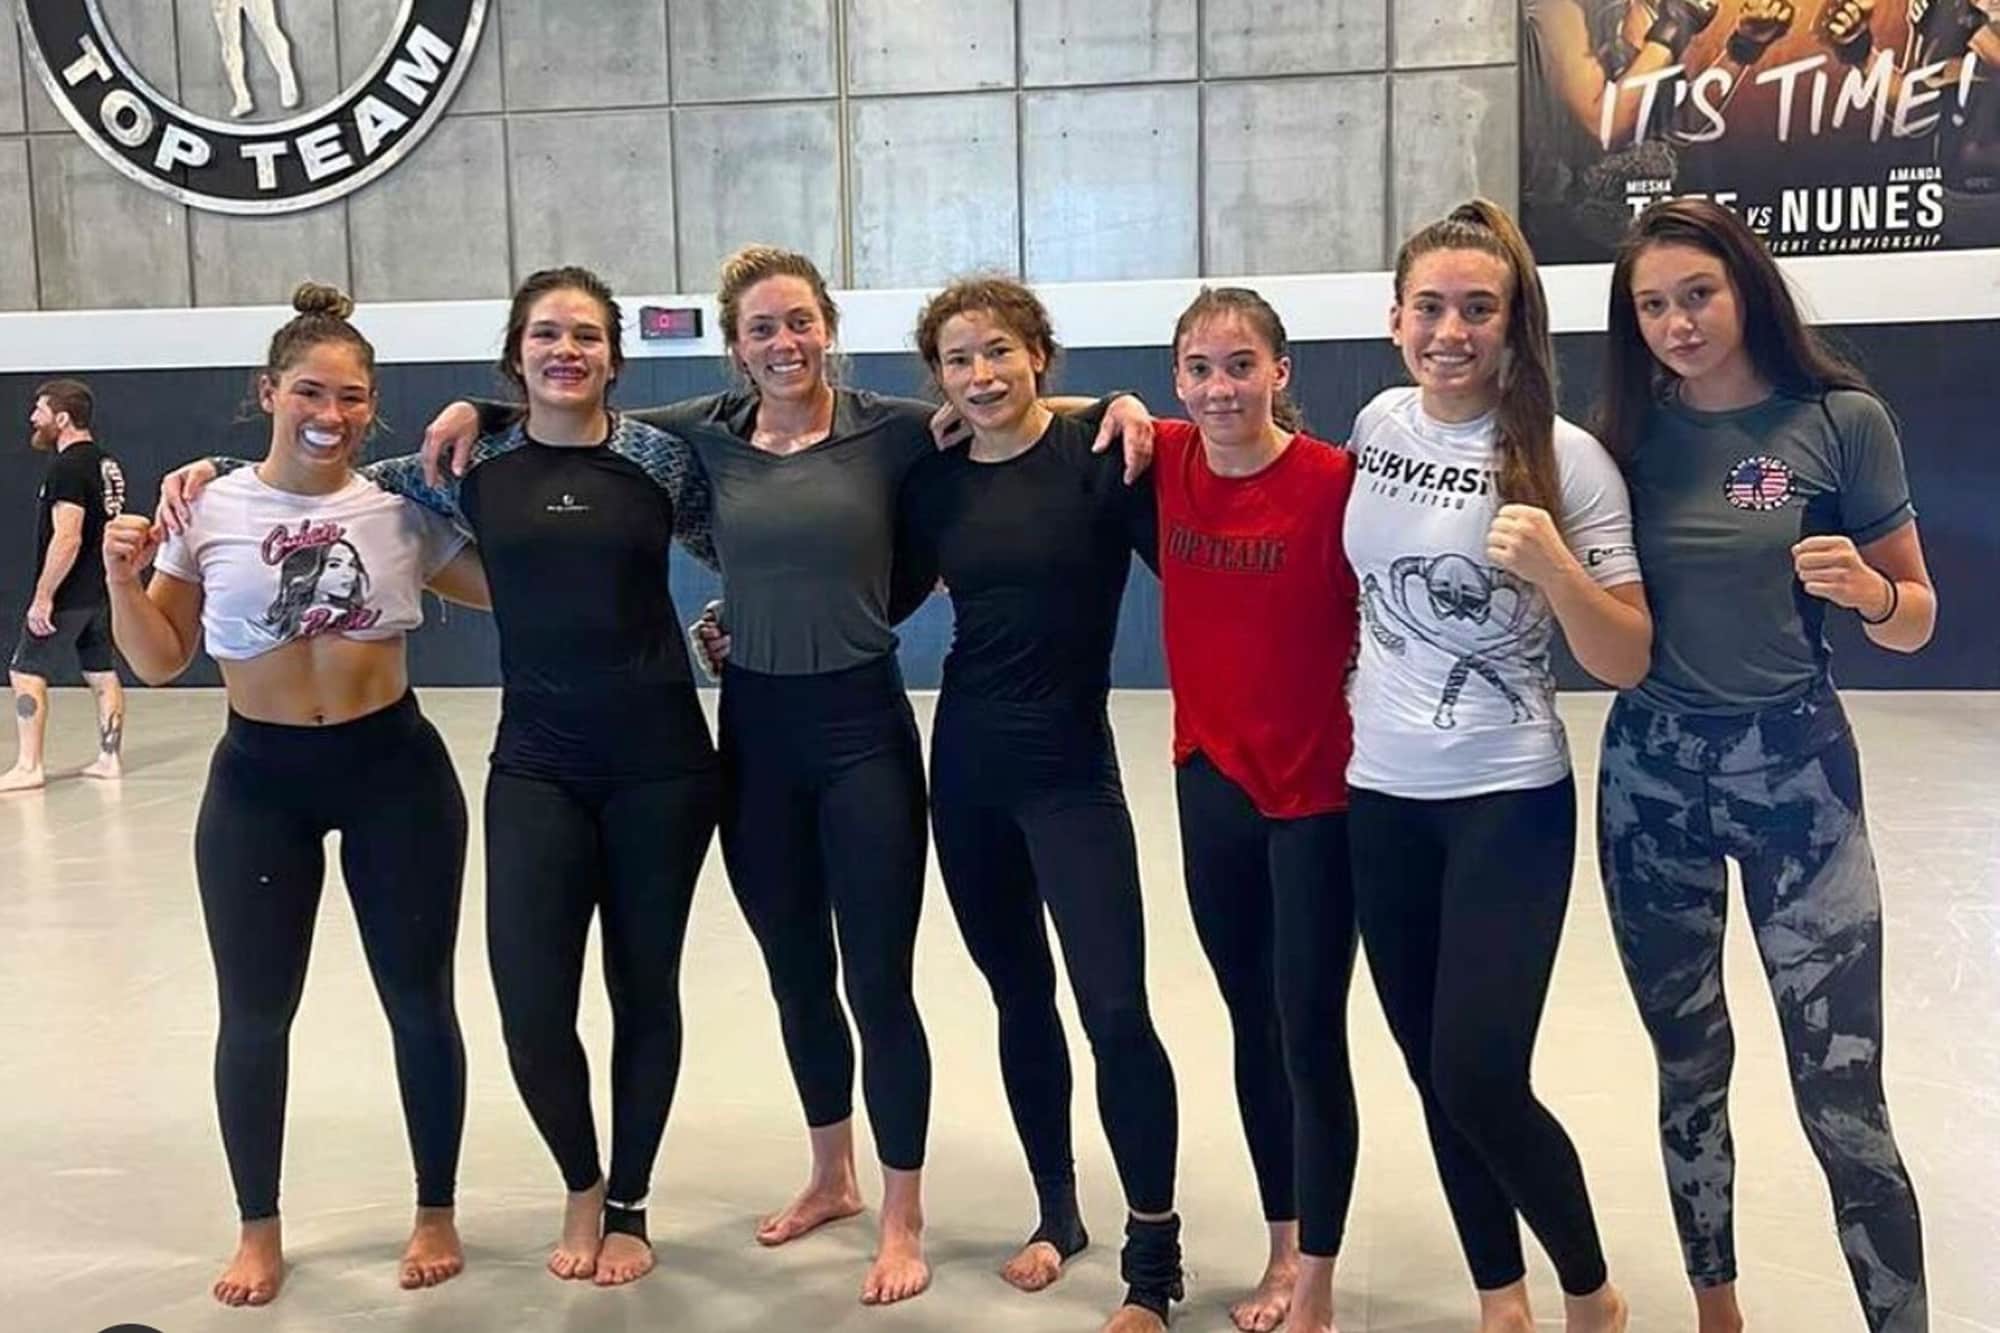 Michelle Montague reflects on months of exile but remains upbeat about future after training at the American Top Team and SBG gyms